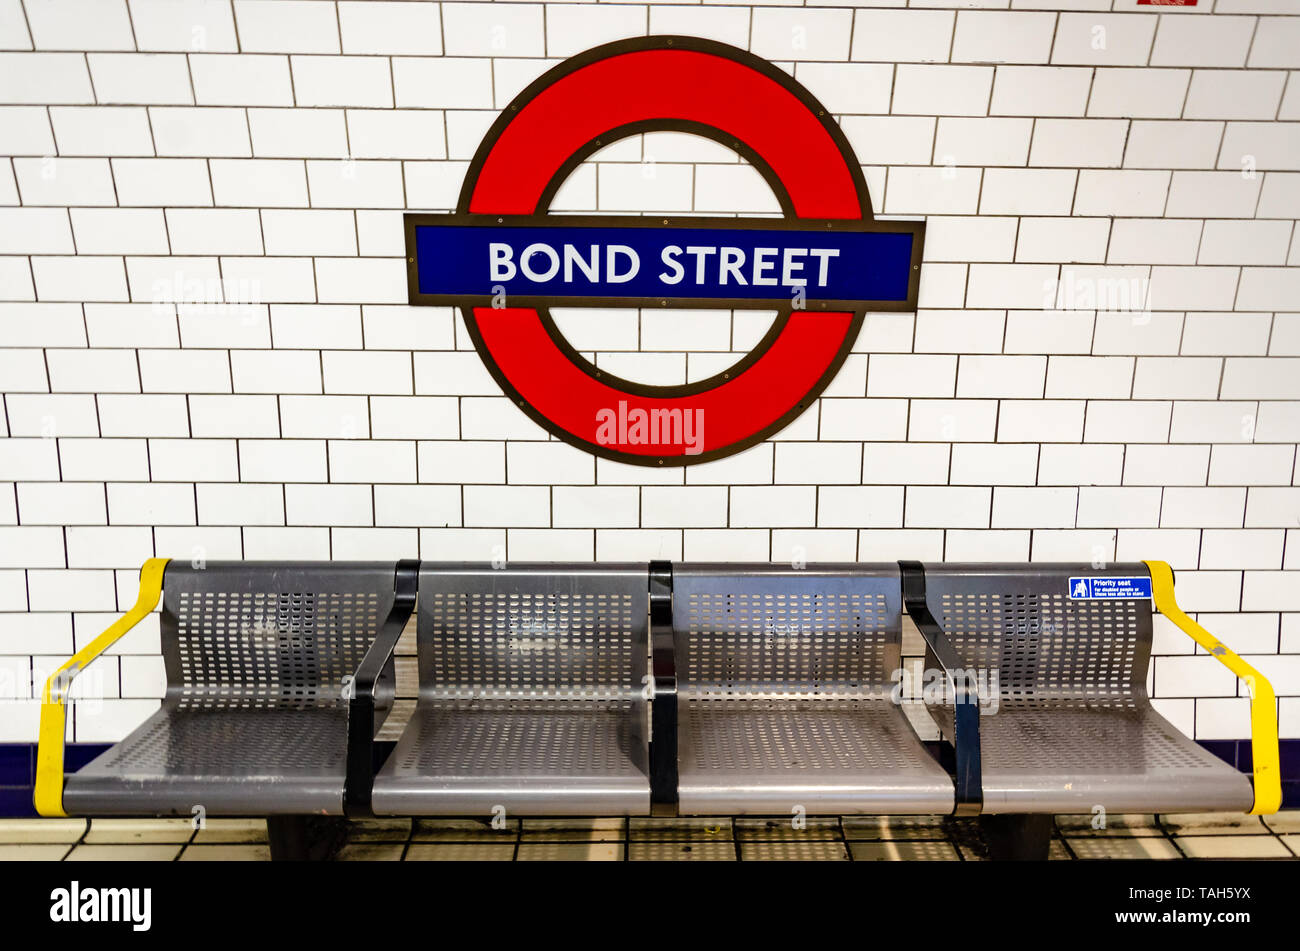 A metal bench on the platform at Bank London Underground Railway Station. Stock Photo